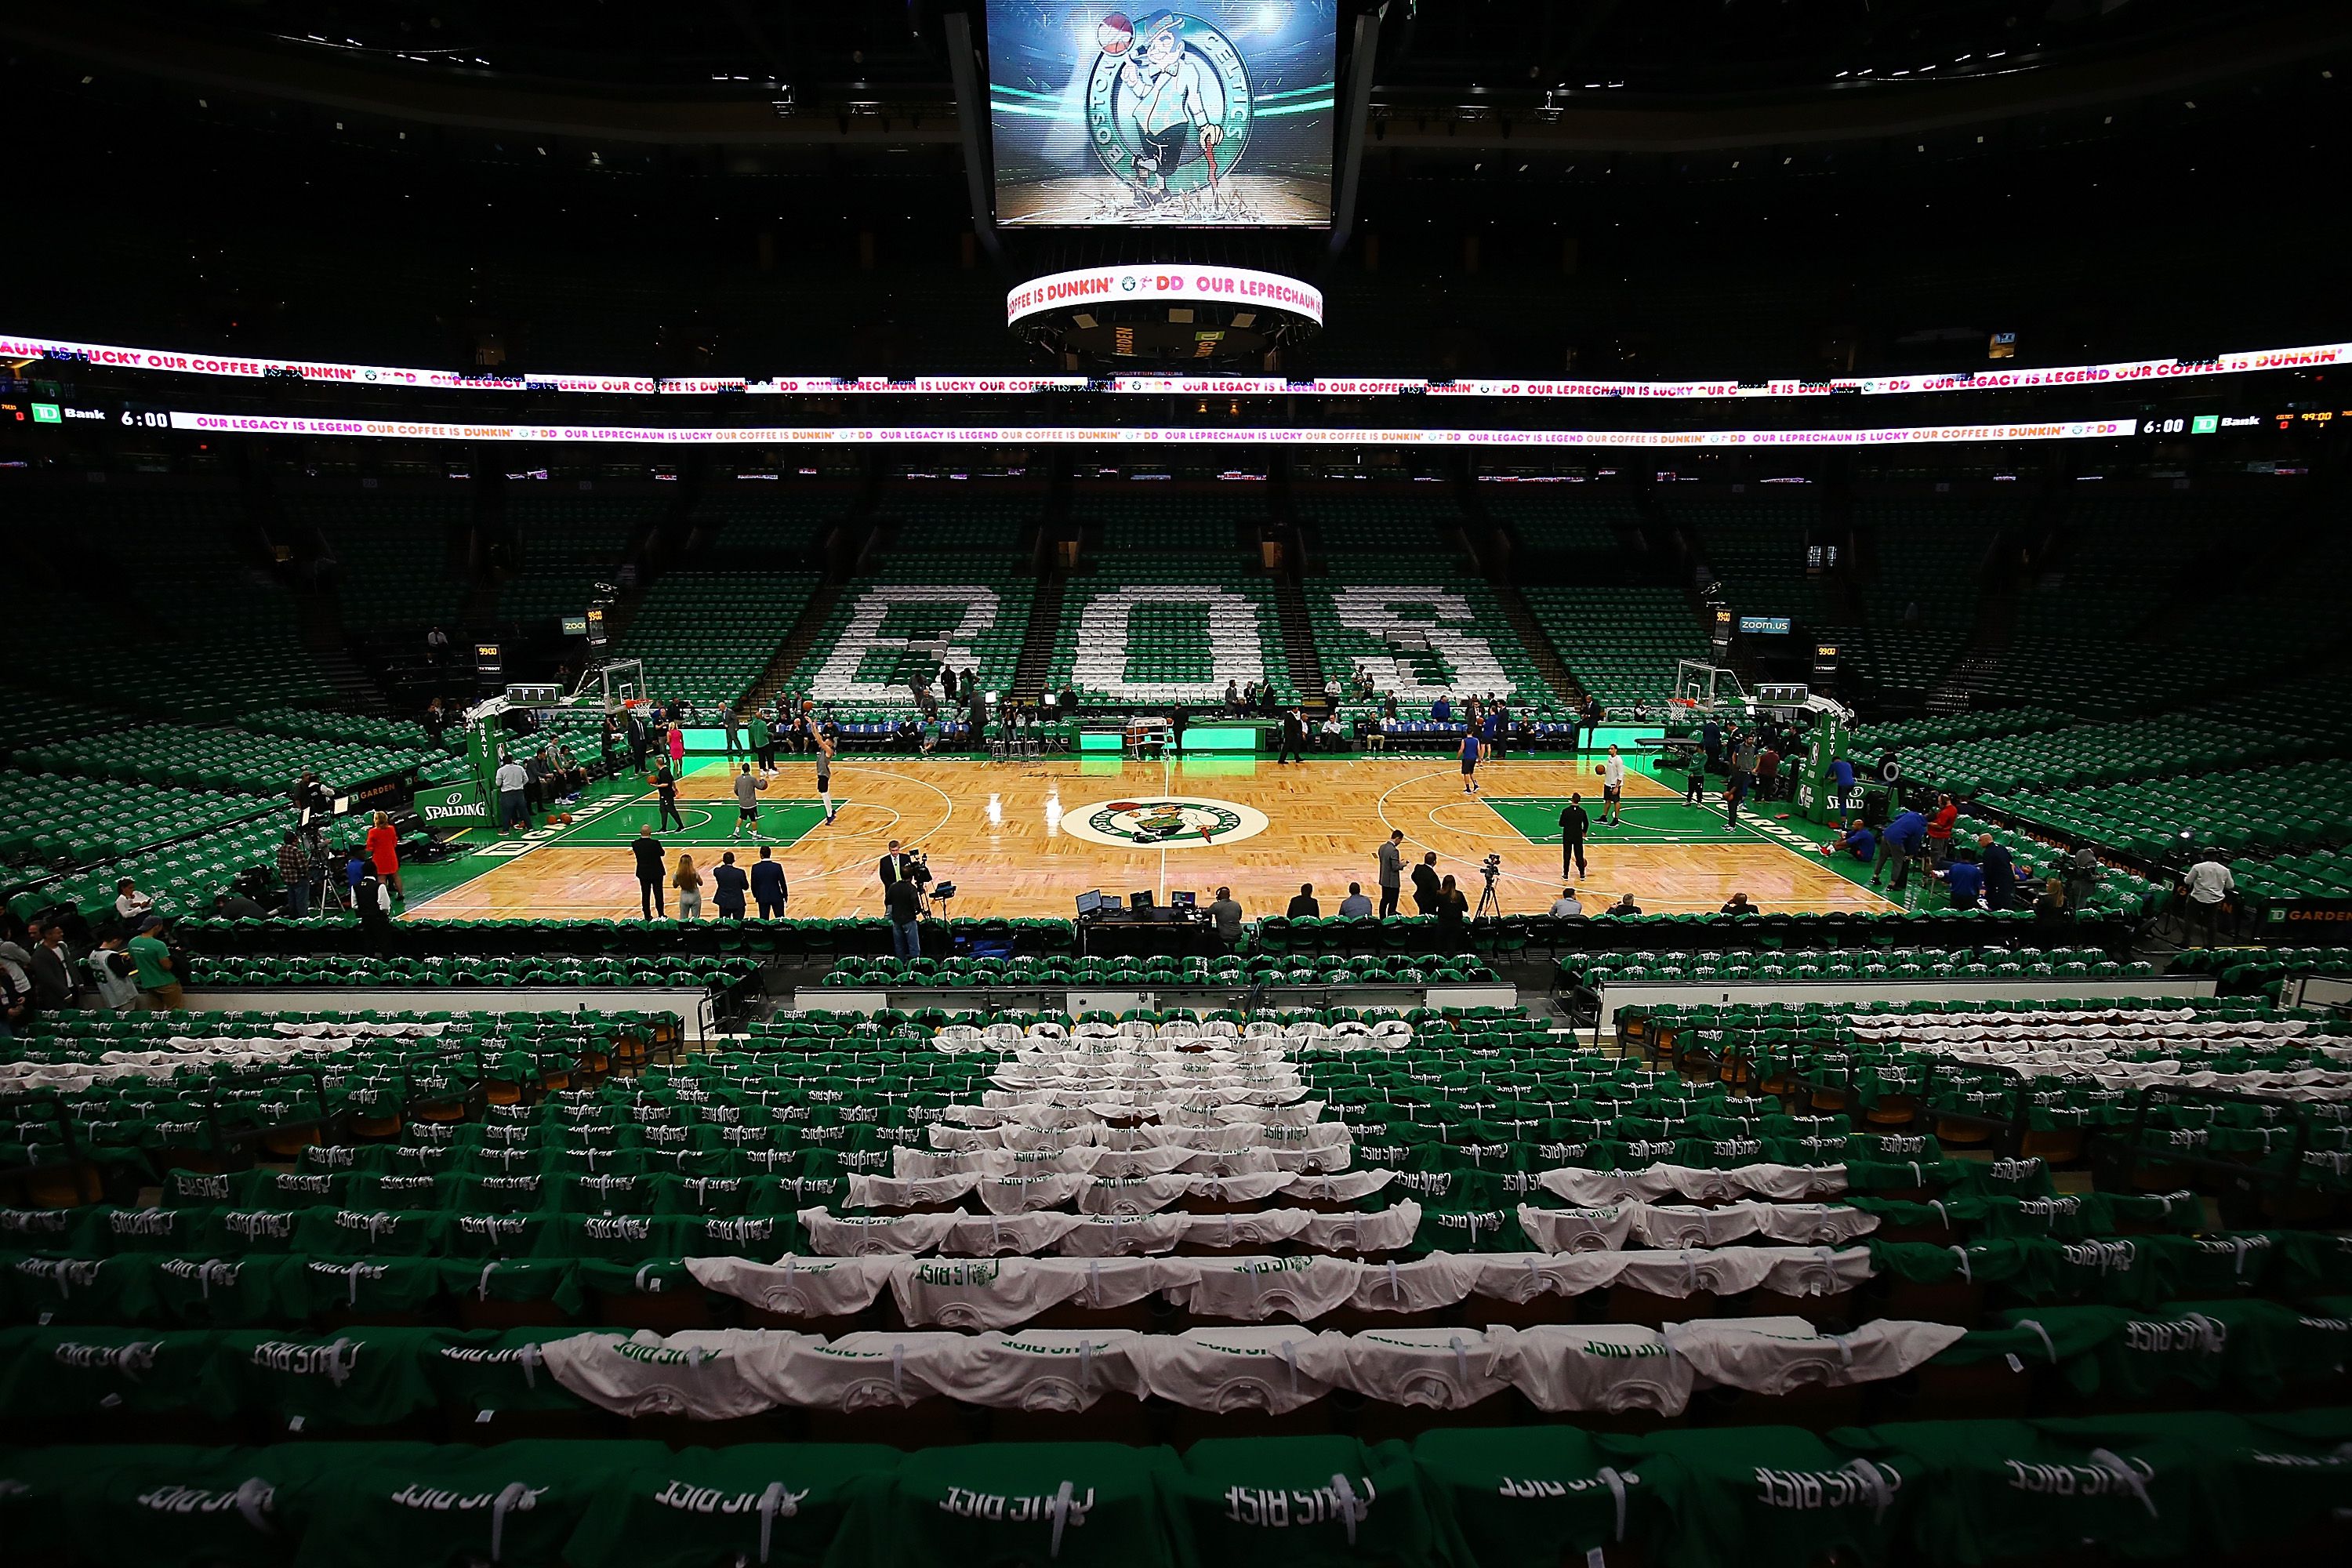 TD Garden - Boston Celtics fans, we are ready for you! C's